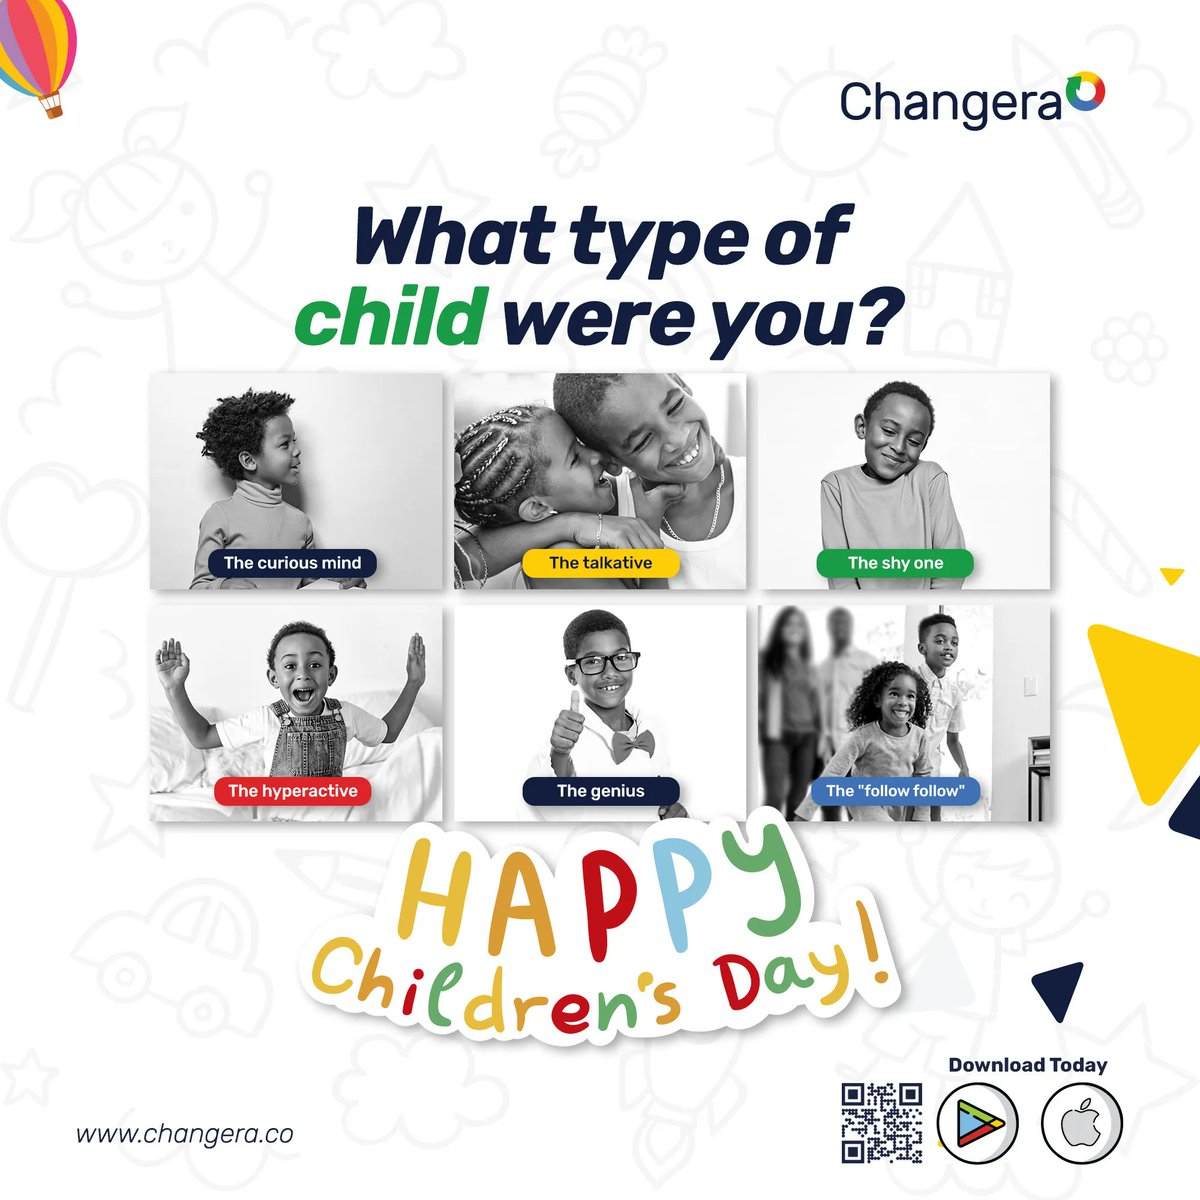 Life is so much better when you let the child inside you live. 

Happy Children's Day 👨‍👦‍👦👨‍👧‍👦💜

#childrensday #Changera #kids #children #fun #childrenseemagic #thechildrenoftheworld #happiness